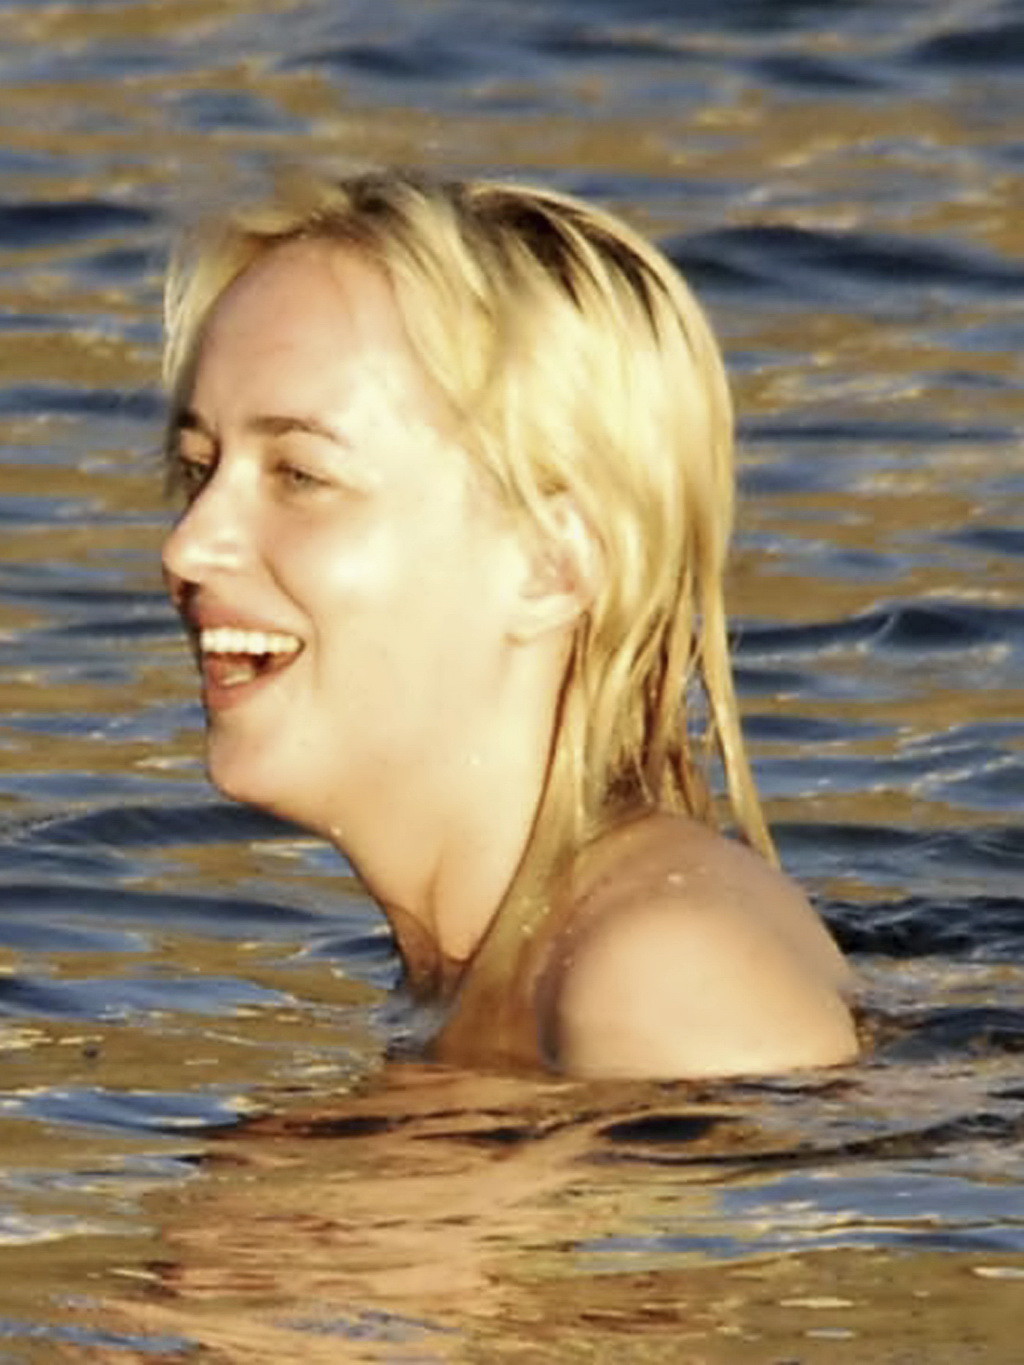 Dakota Johnson caught topless at the beach during a vacation in Italy #75180882